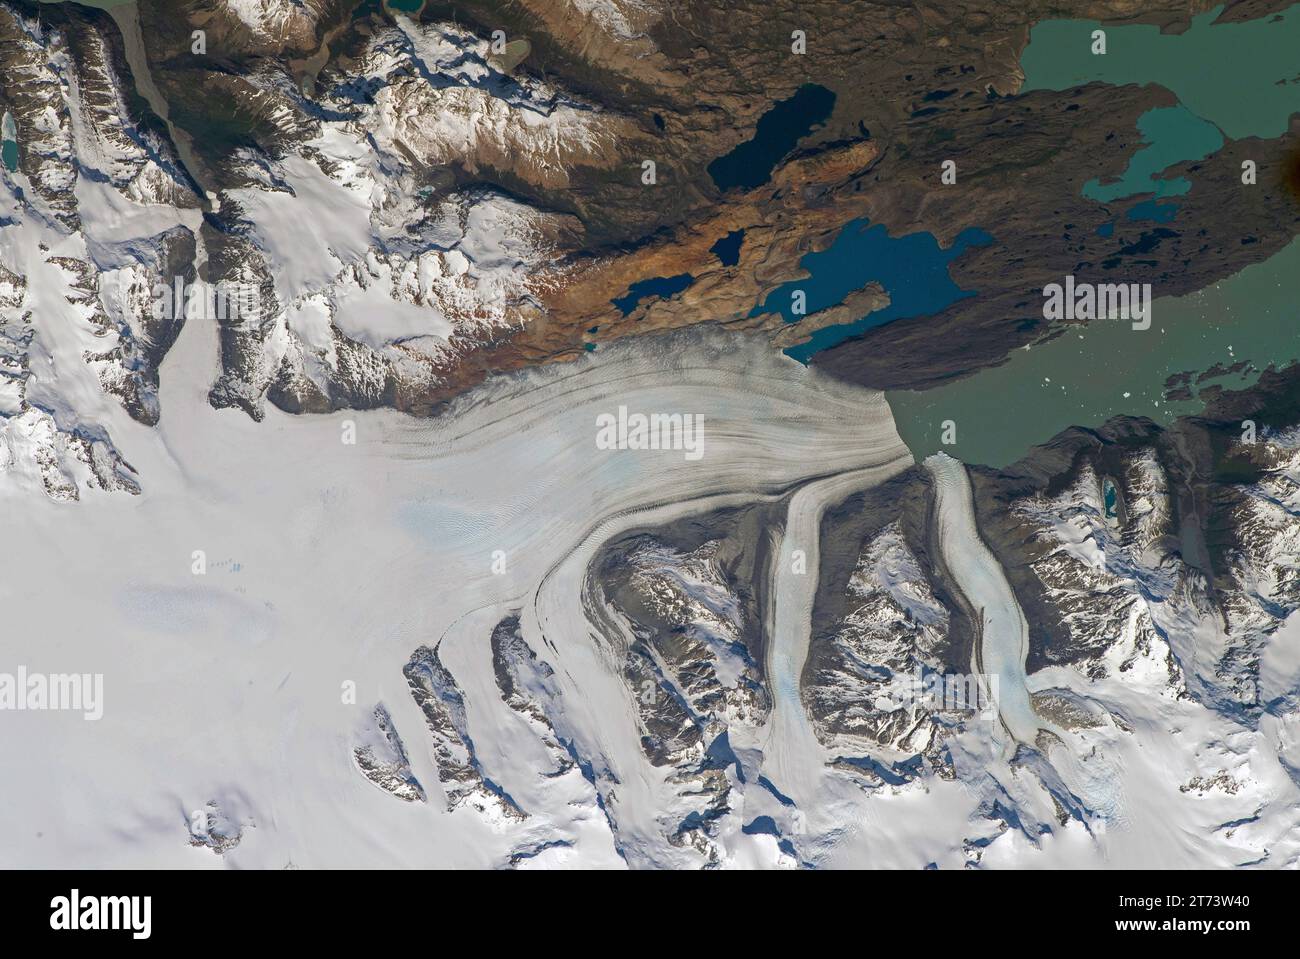 CHILE/ARGENTINA - 31 October 2023 - Upsala Glacier, in between Chile and Argentina, flows into Lago Argentina in this photograph from the Internationa Stock Photo